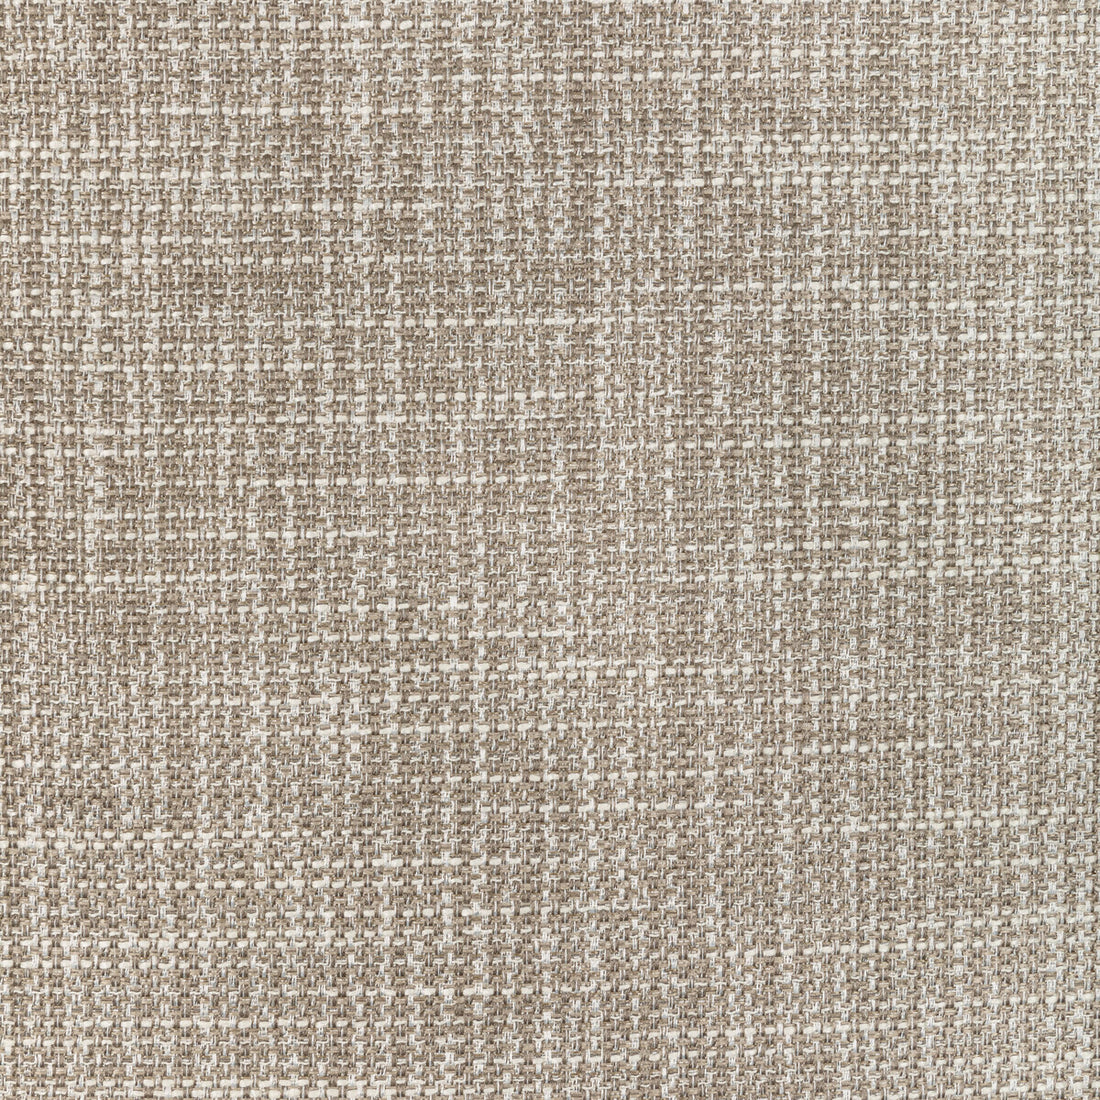 Luma Texture fabric in au lait color - pattern 4947.1101.0 - by Kravet Contract in the Fr Window Luma Texture collection